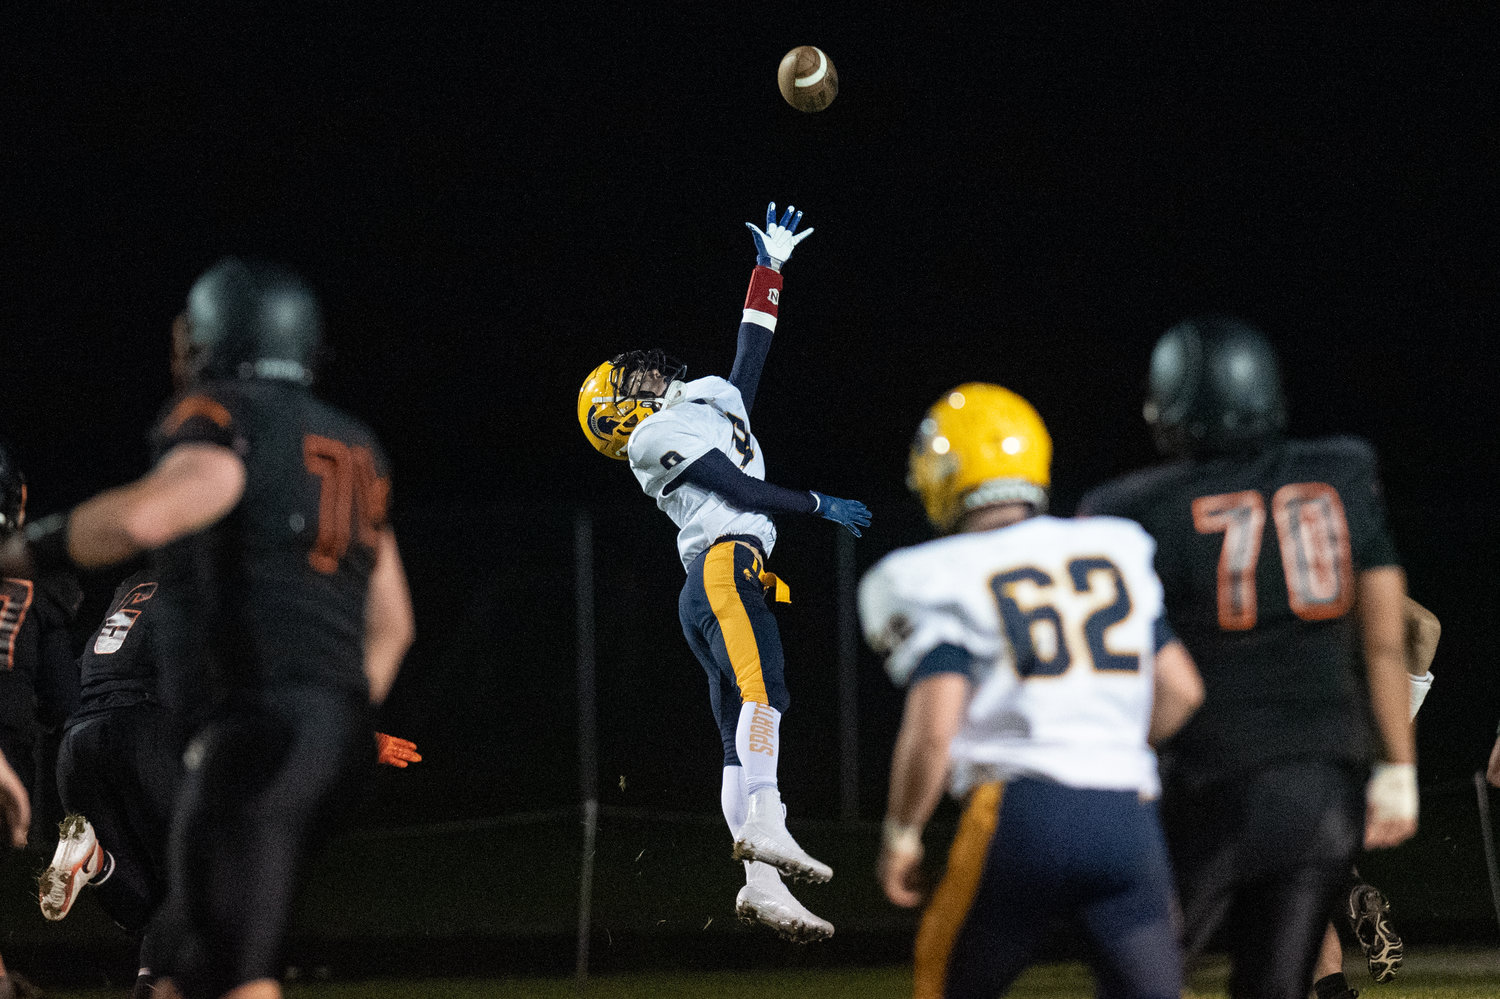 A Forks receiver reaches for a pass just out of his reach against Napavine Oct. 22.